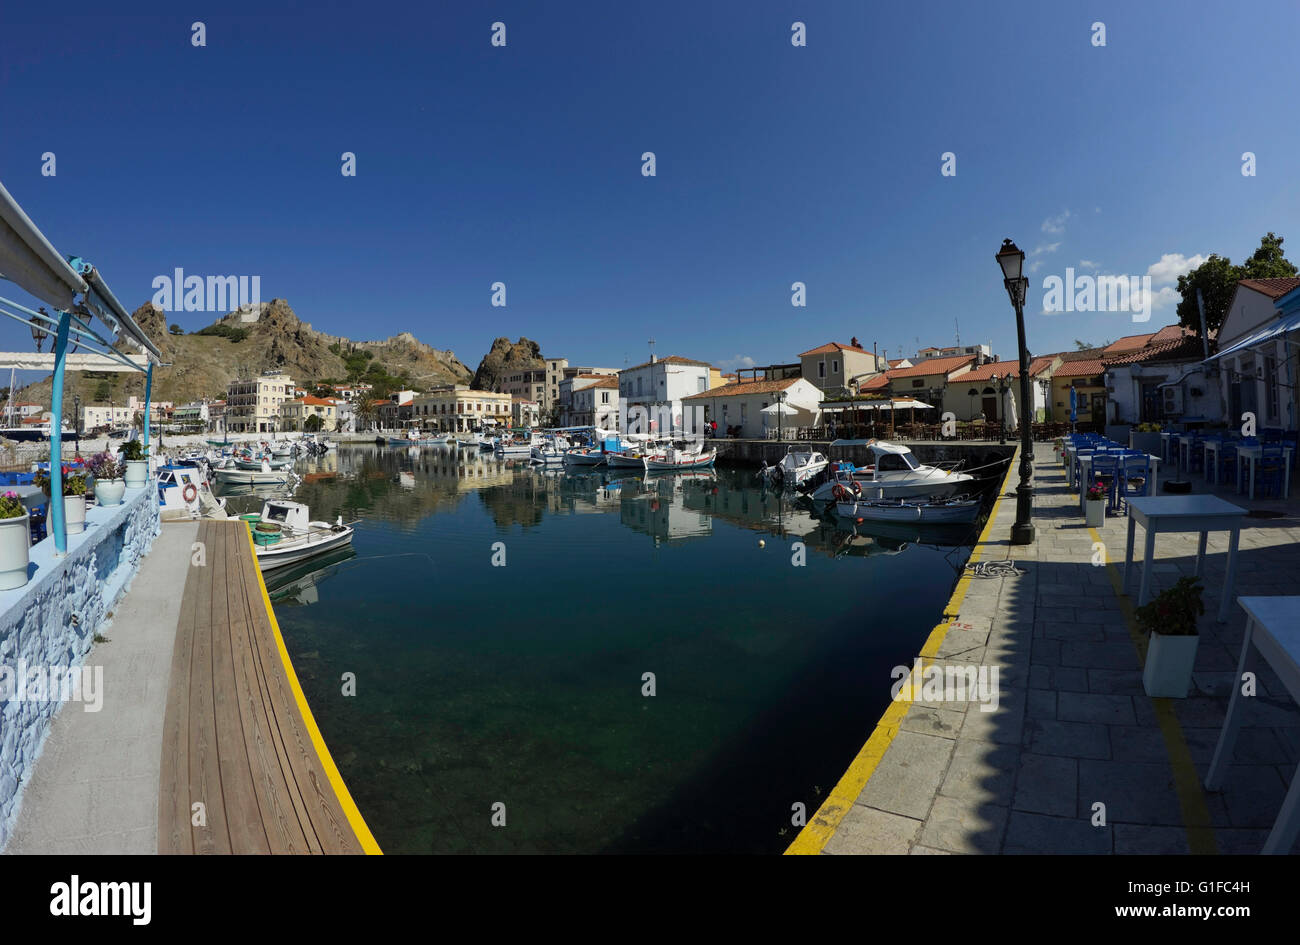 Fisheye view of Myrina's quay anchorage, its newly-built wooden dock access extension and taverns. Limnos or Lemnos, Greece Stock Photo